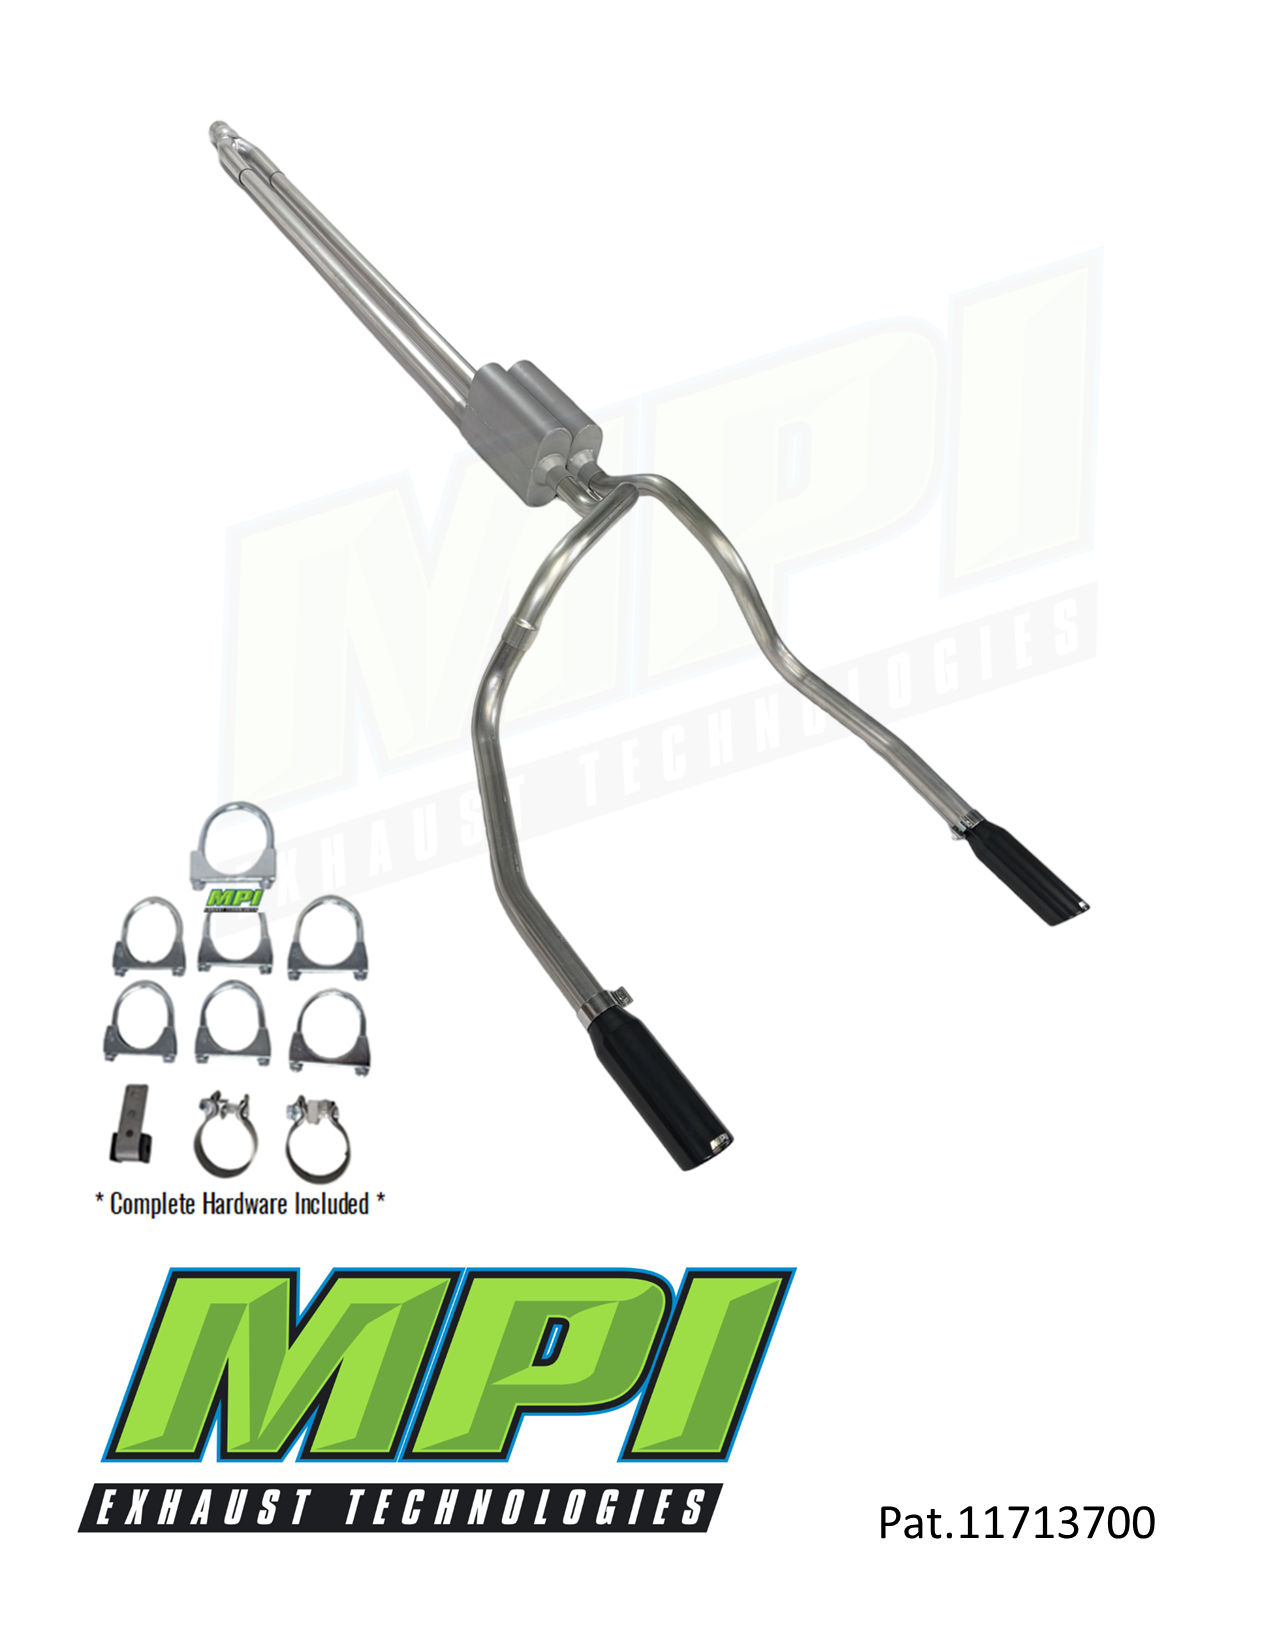 GM 6.0L 2014-2018 Truck Dual Exhaust Kits - Clamp-on System